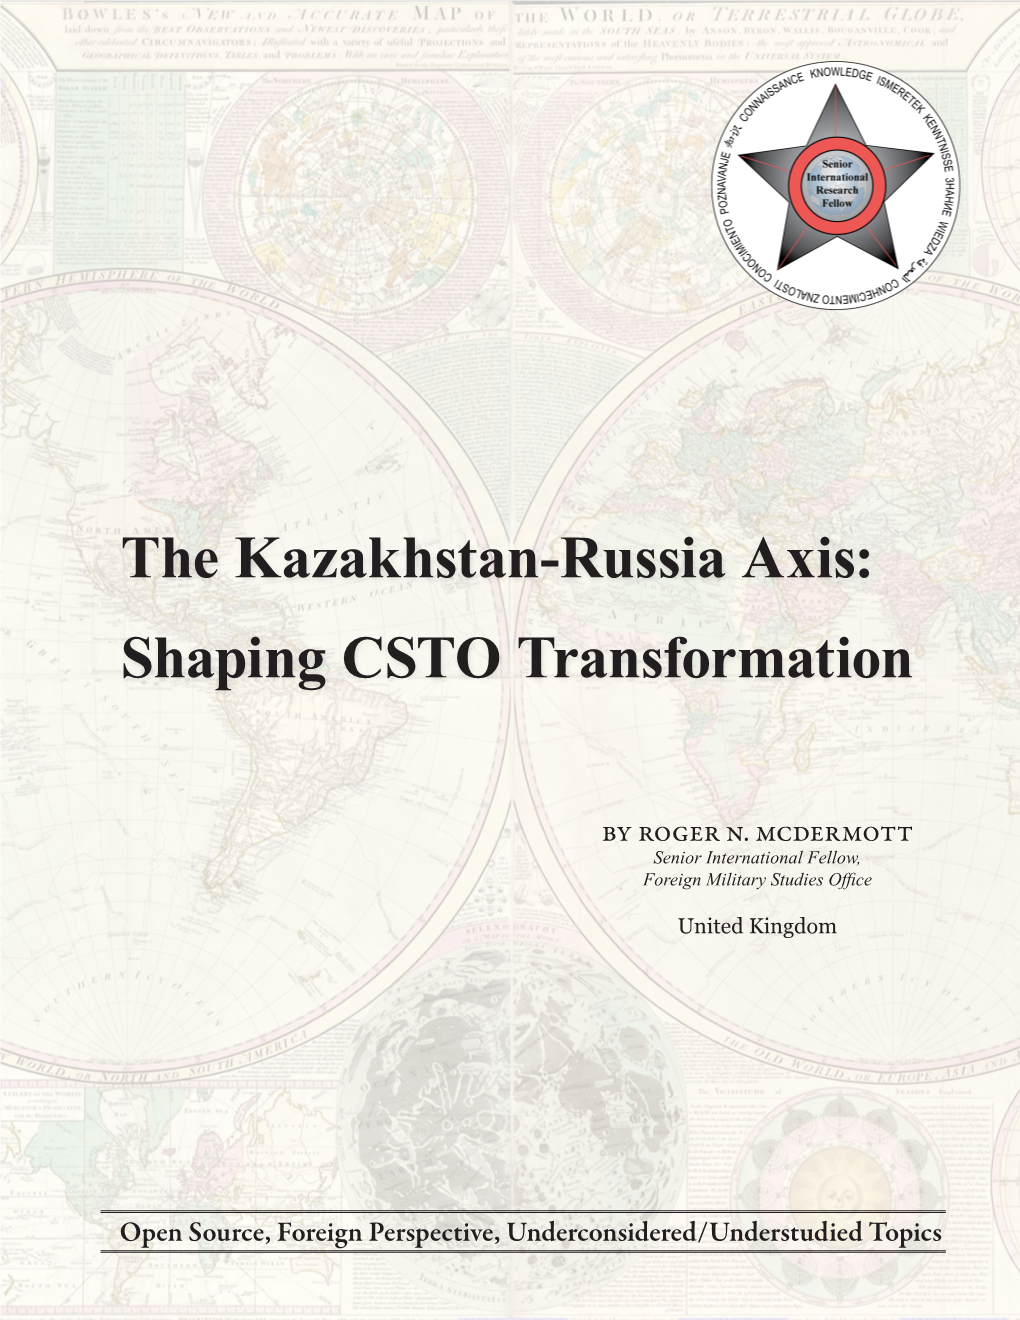 The Kazakhstan-Russia Axis: Shaping CSTO Transformation